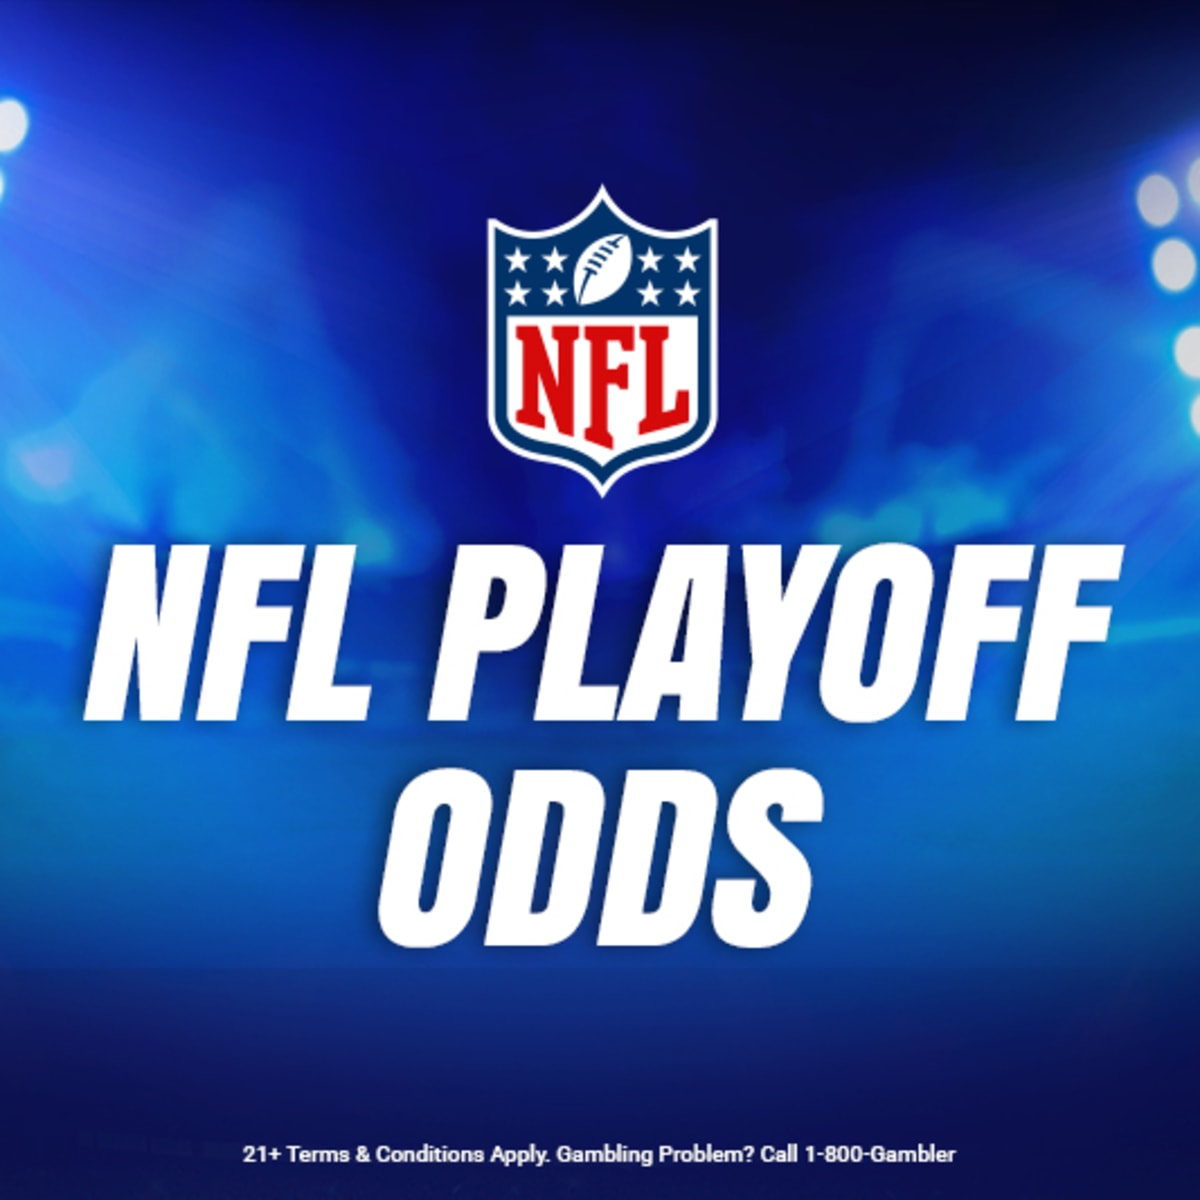 Best NFL Win Total Bets to Make - Post NFL Draft